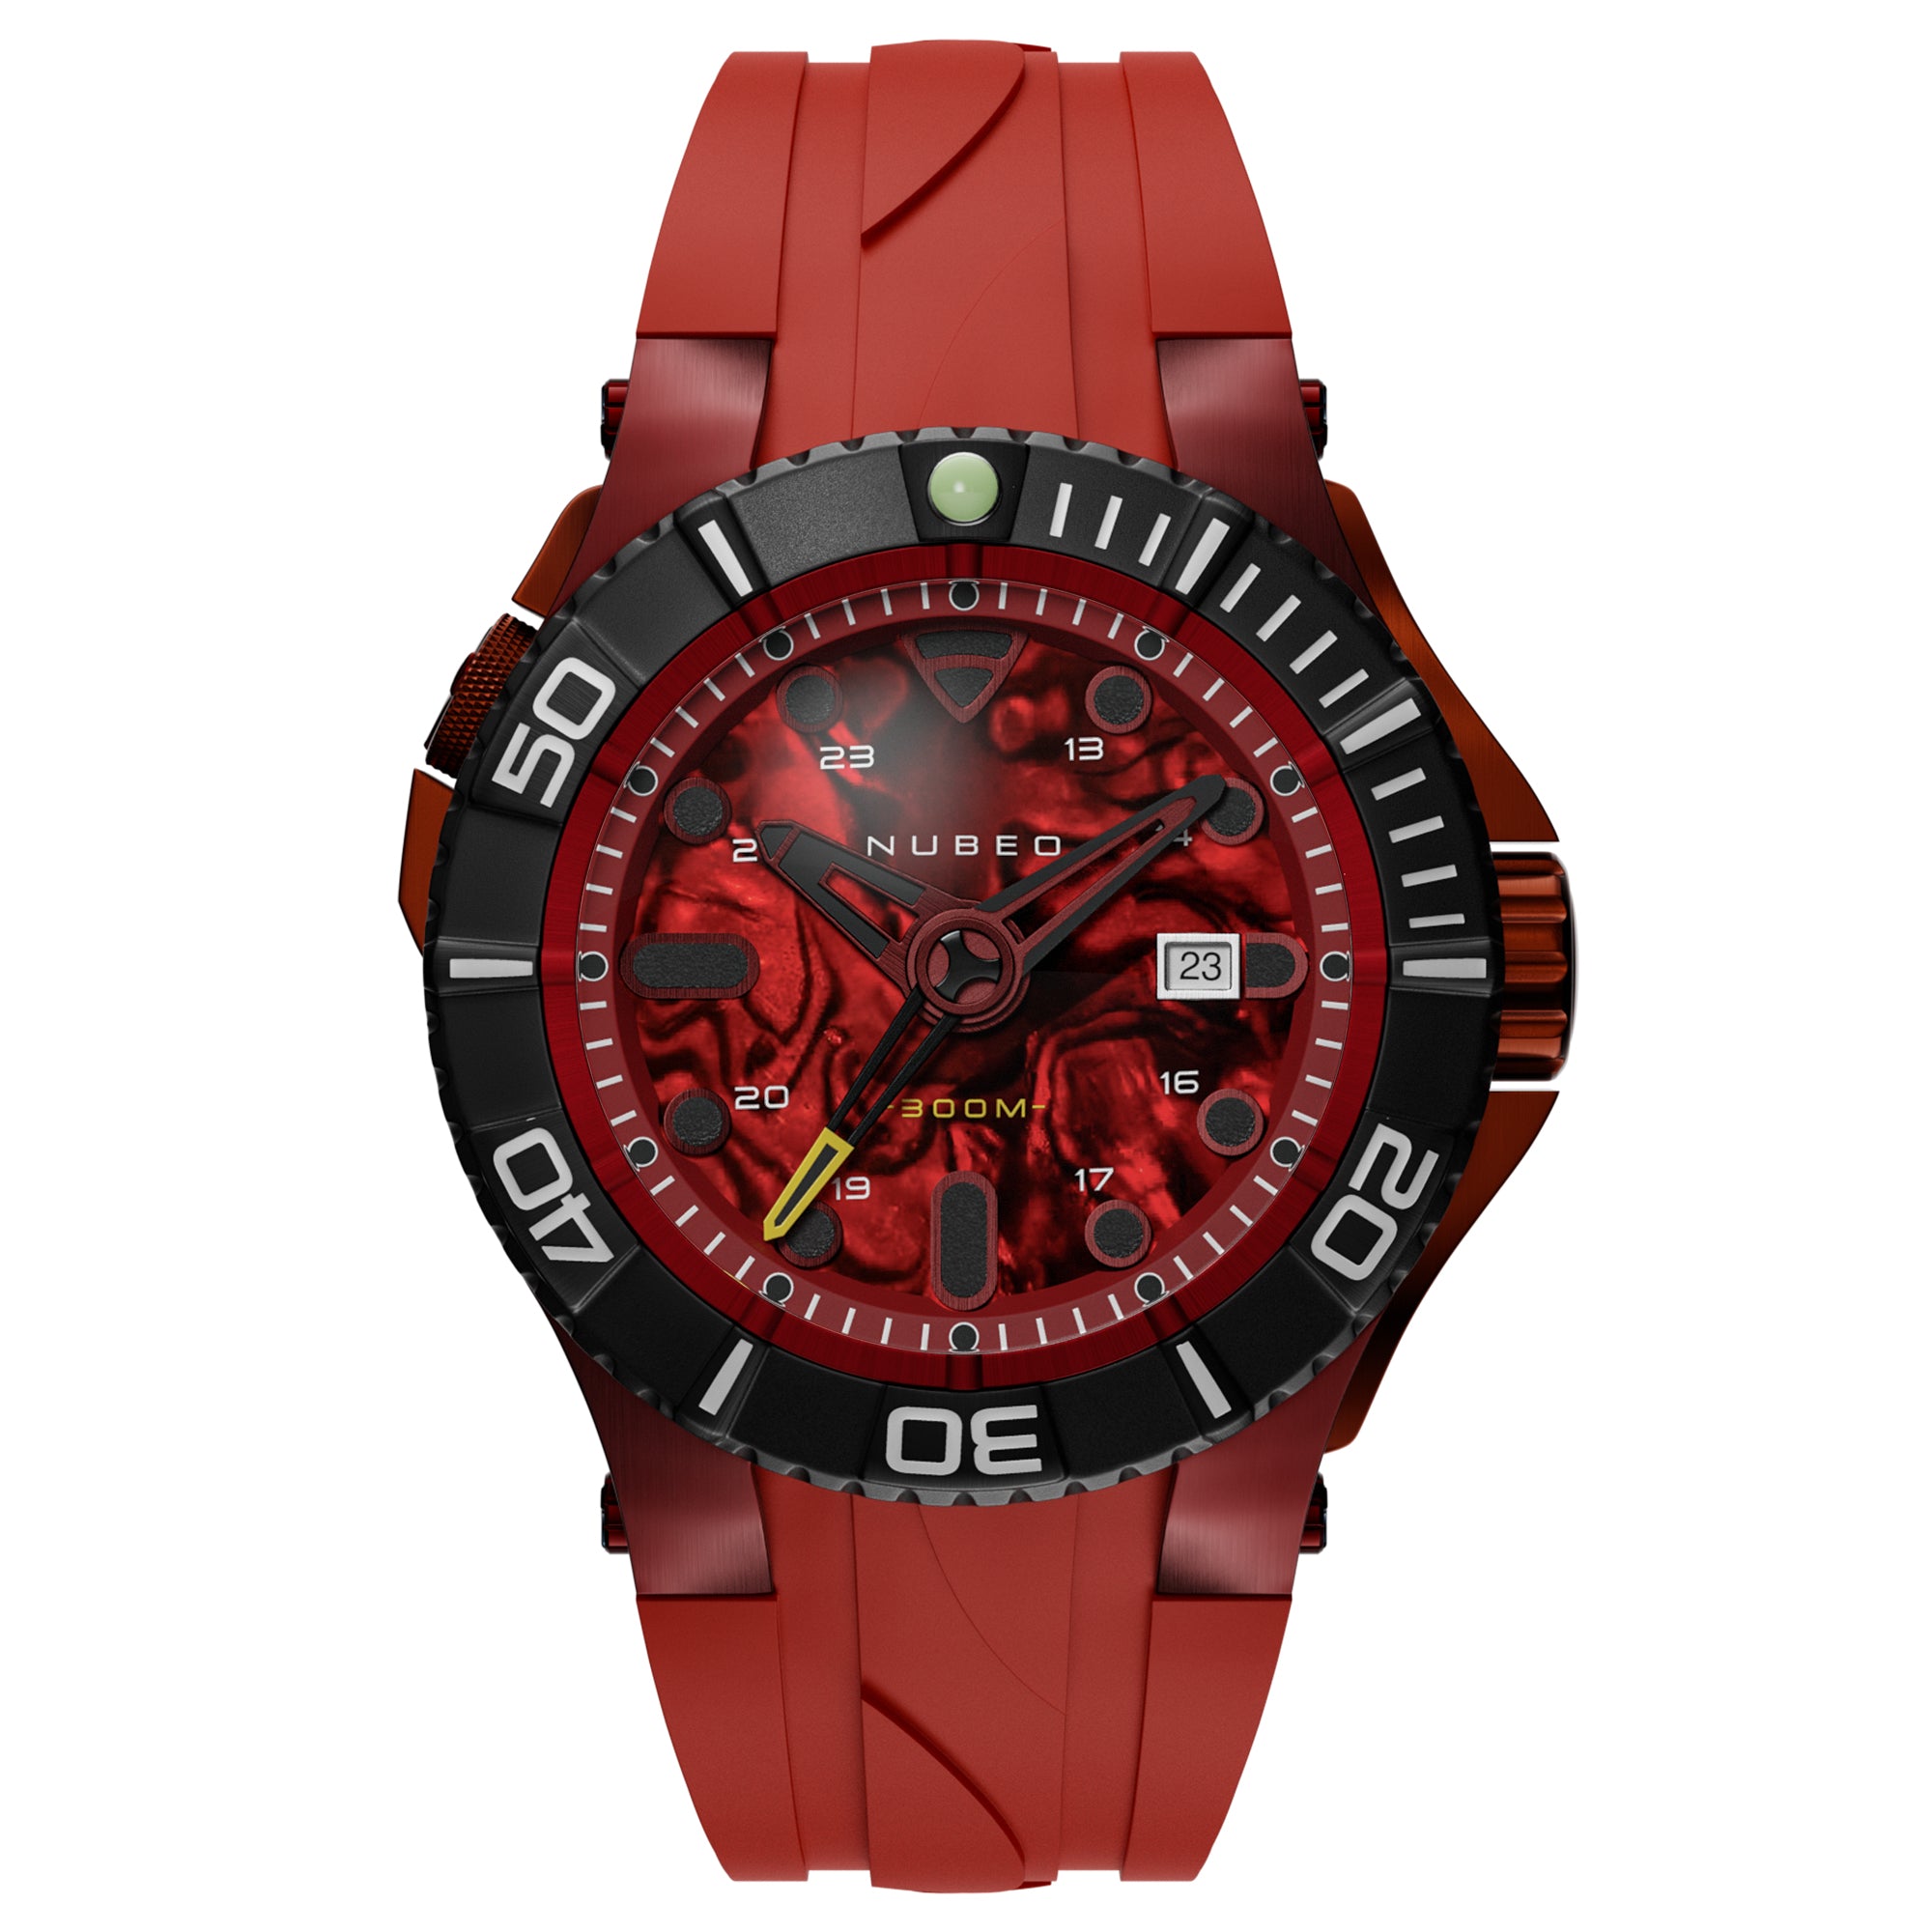 NUBEO Nubeo Manta Automatic Limited Edition Red Abalone Men's Watch NB-6054-07